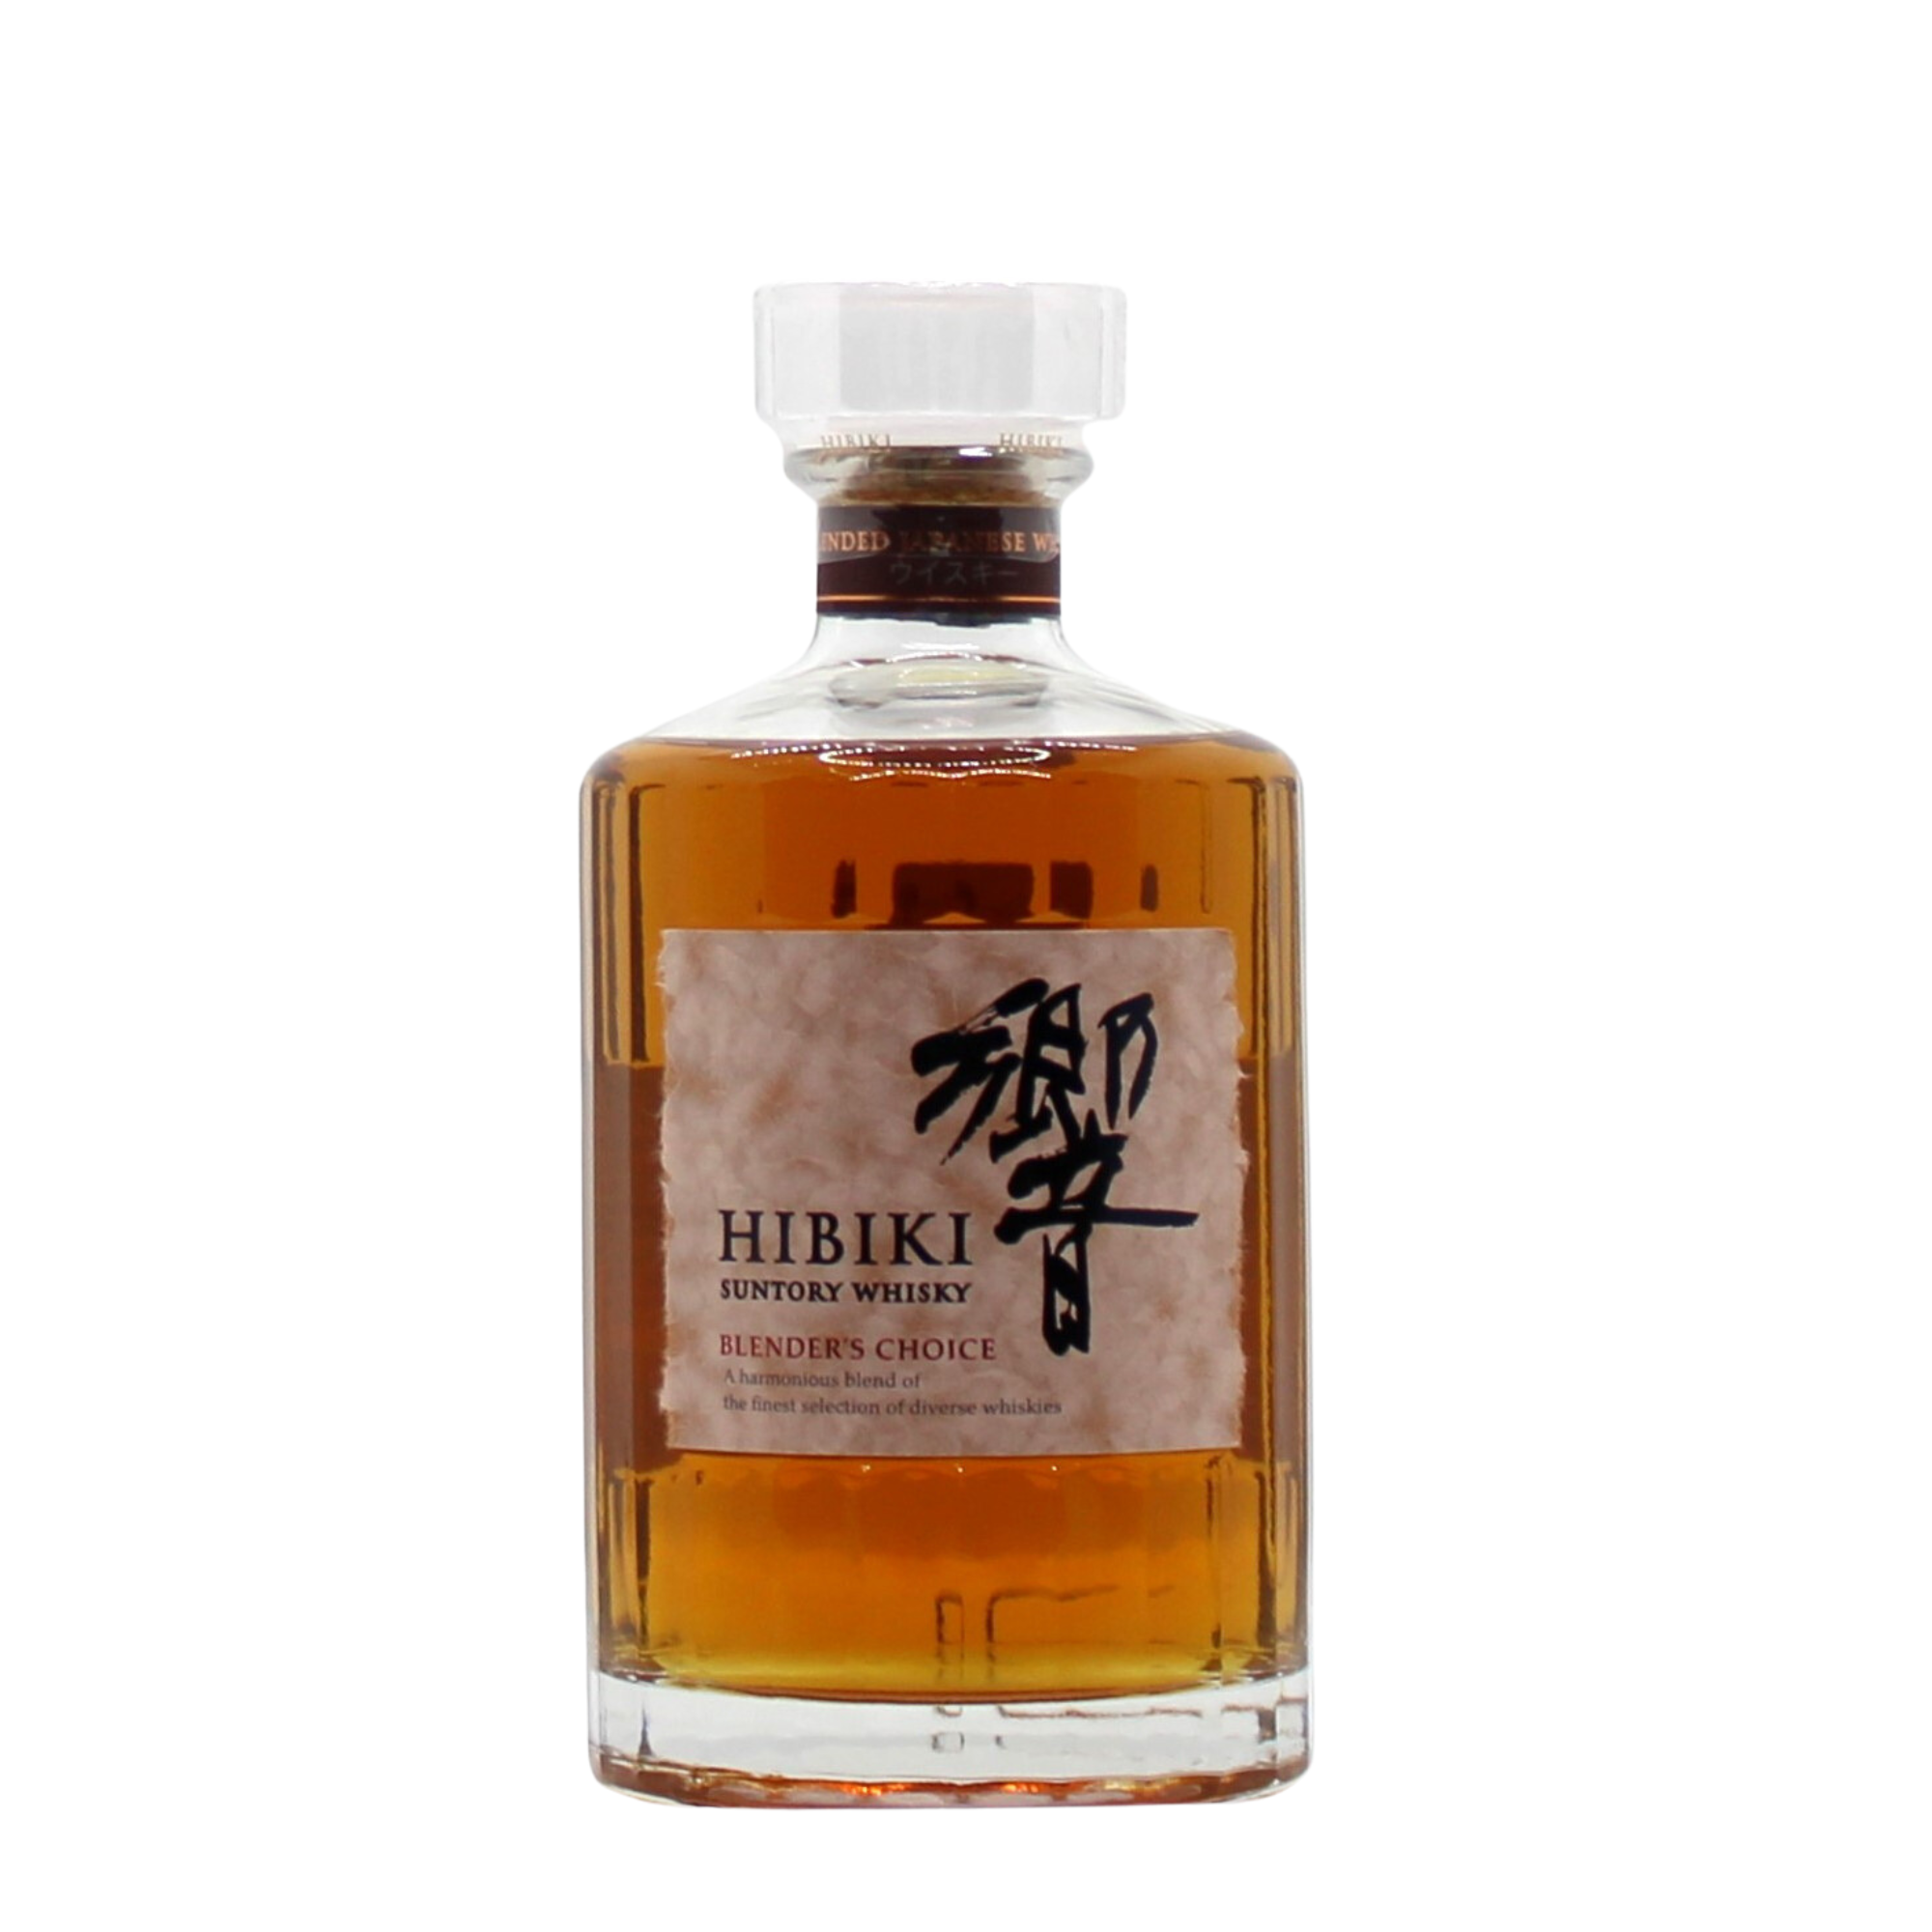 Released around September 2018, soon after the Hibiki 17 was discontinued, this is rumoured to/believed to be the "replacement". A harmonious blend of Japanese malt and grain whiskies from Yamazaki, Hakushu and Chita presented in the traditional Hibiki 24 faceted bottle and reportedly aged between 12 and 30 years with an average age of around 15 years.